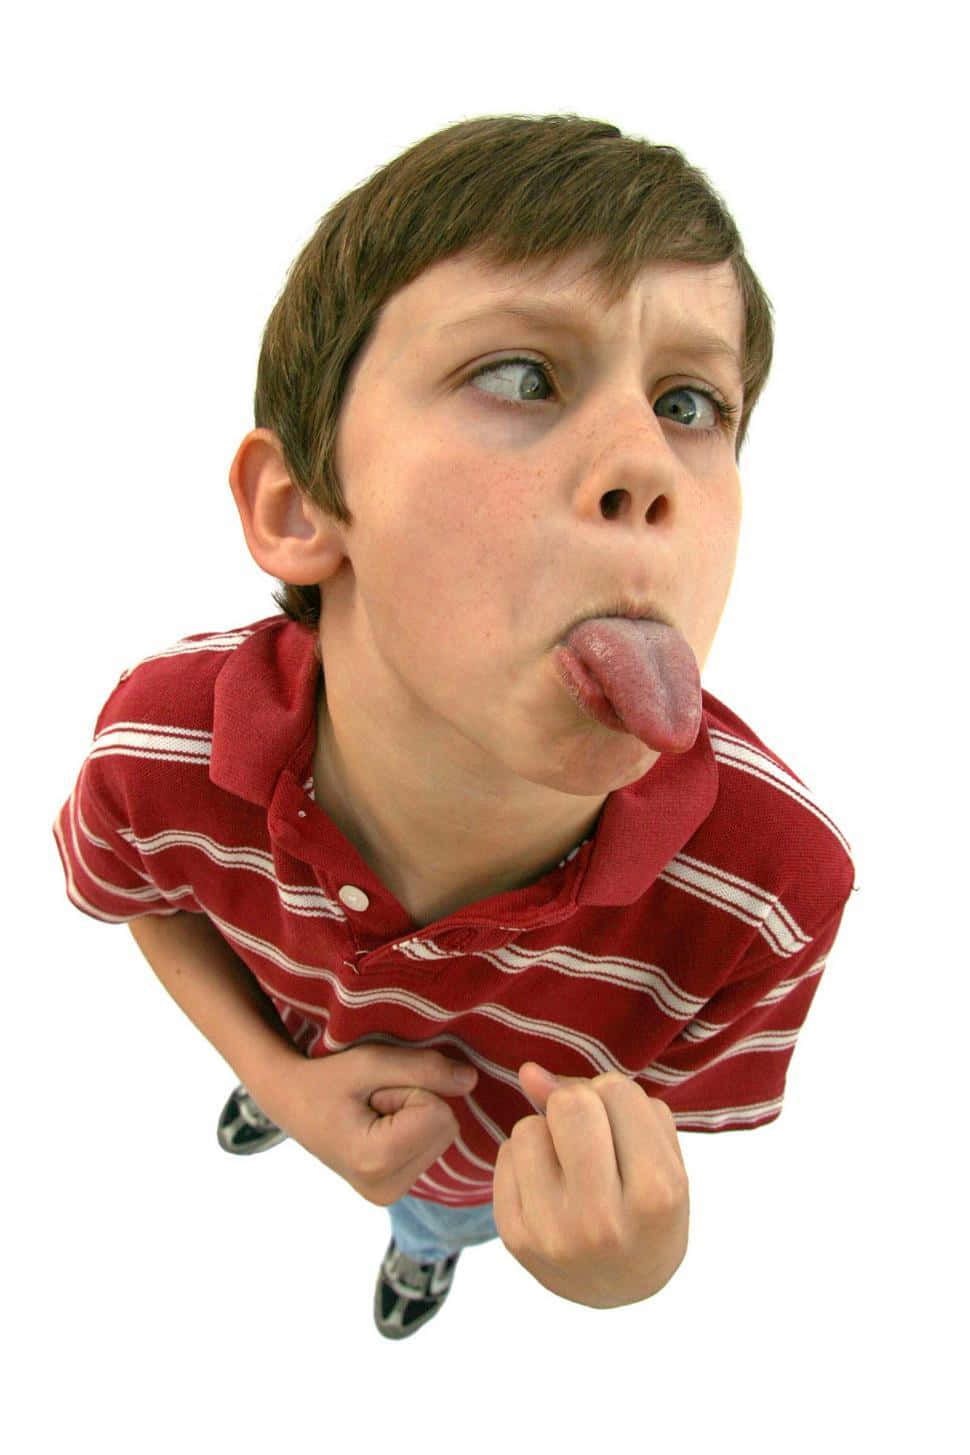 Funny Face Boy Sticking Tongue Out Picture